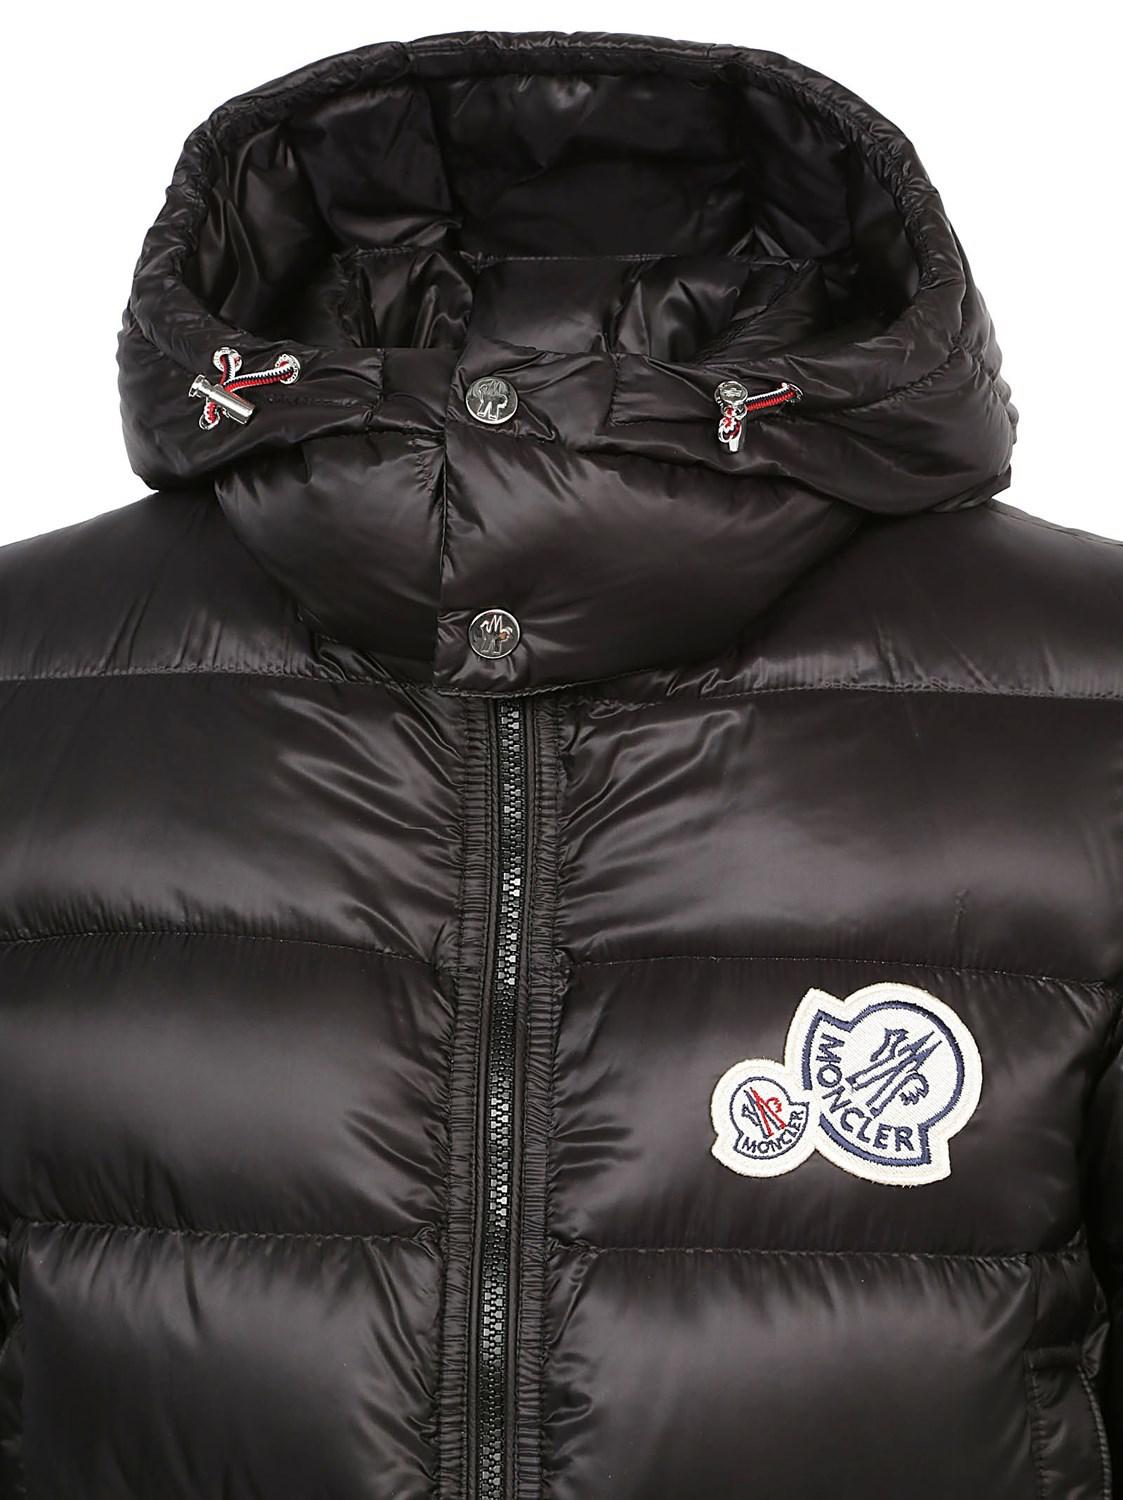 Moncler Synthetic Bramant Down Jacket in Black for Men - Lyst